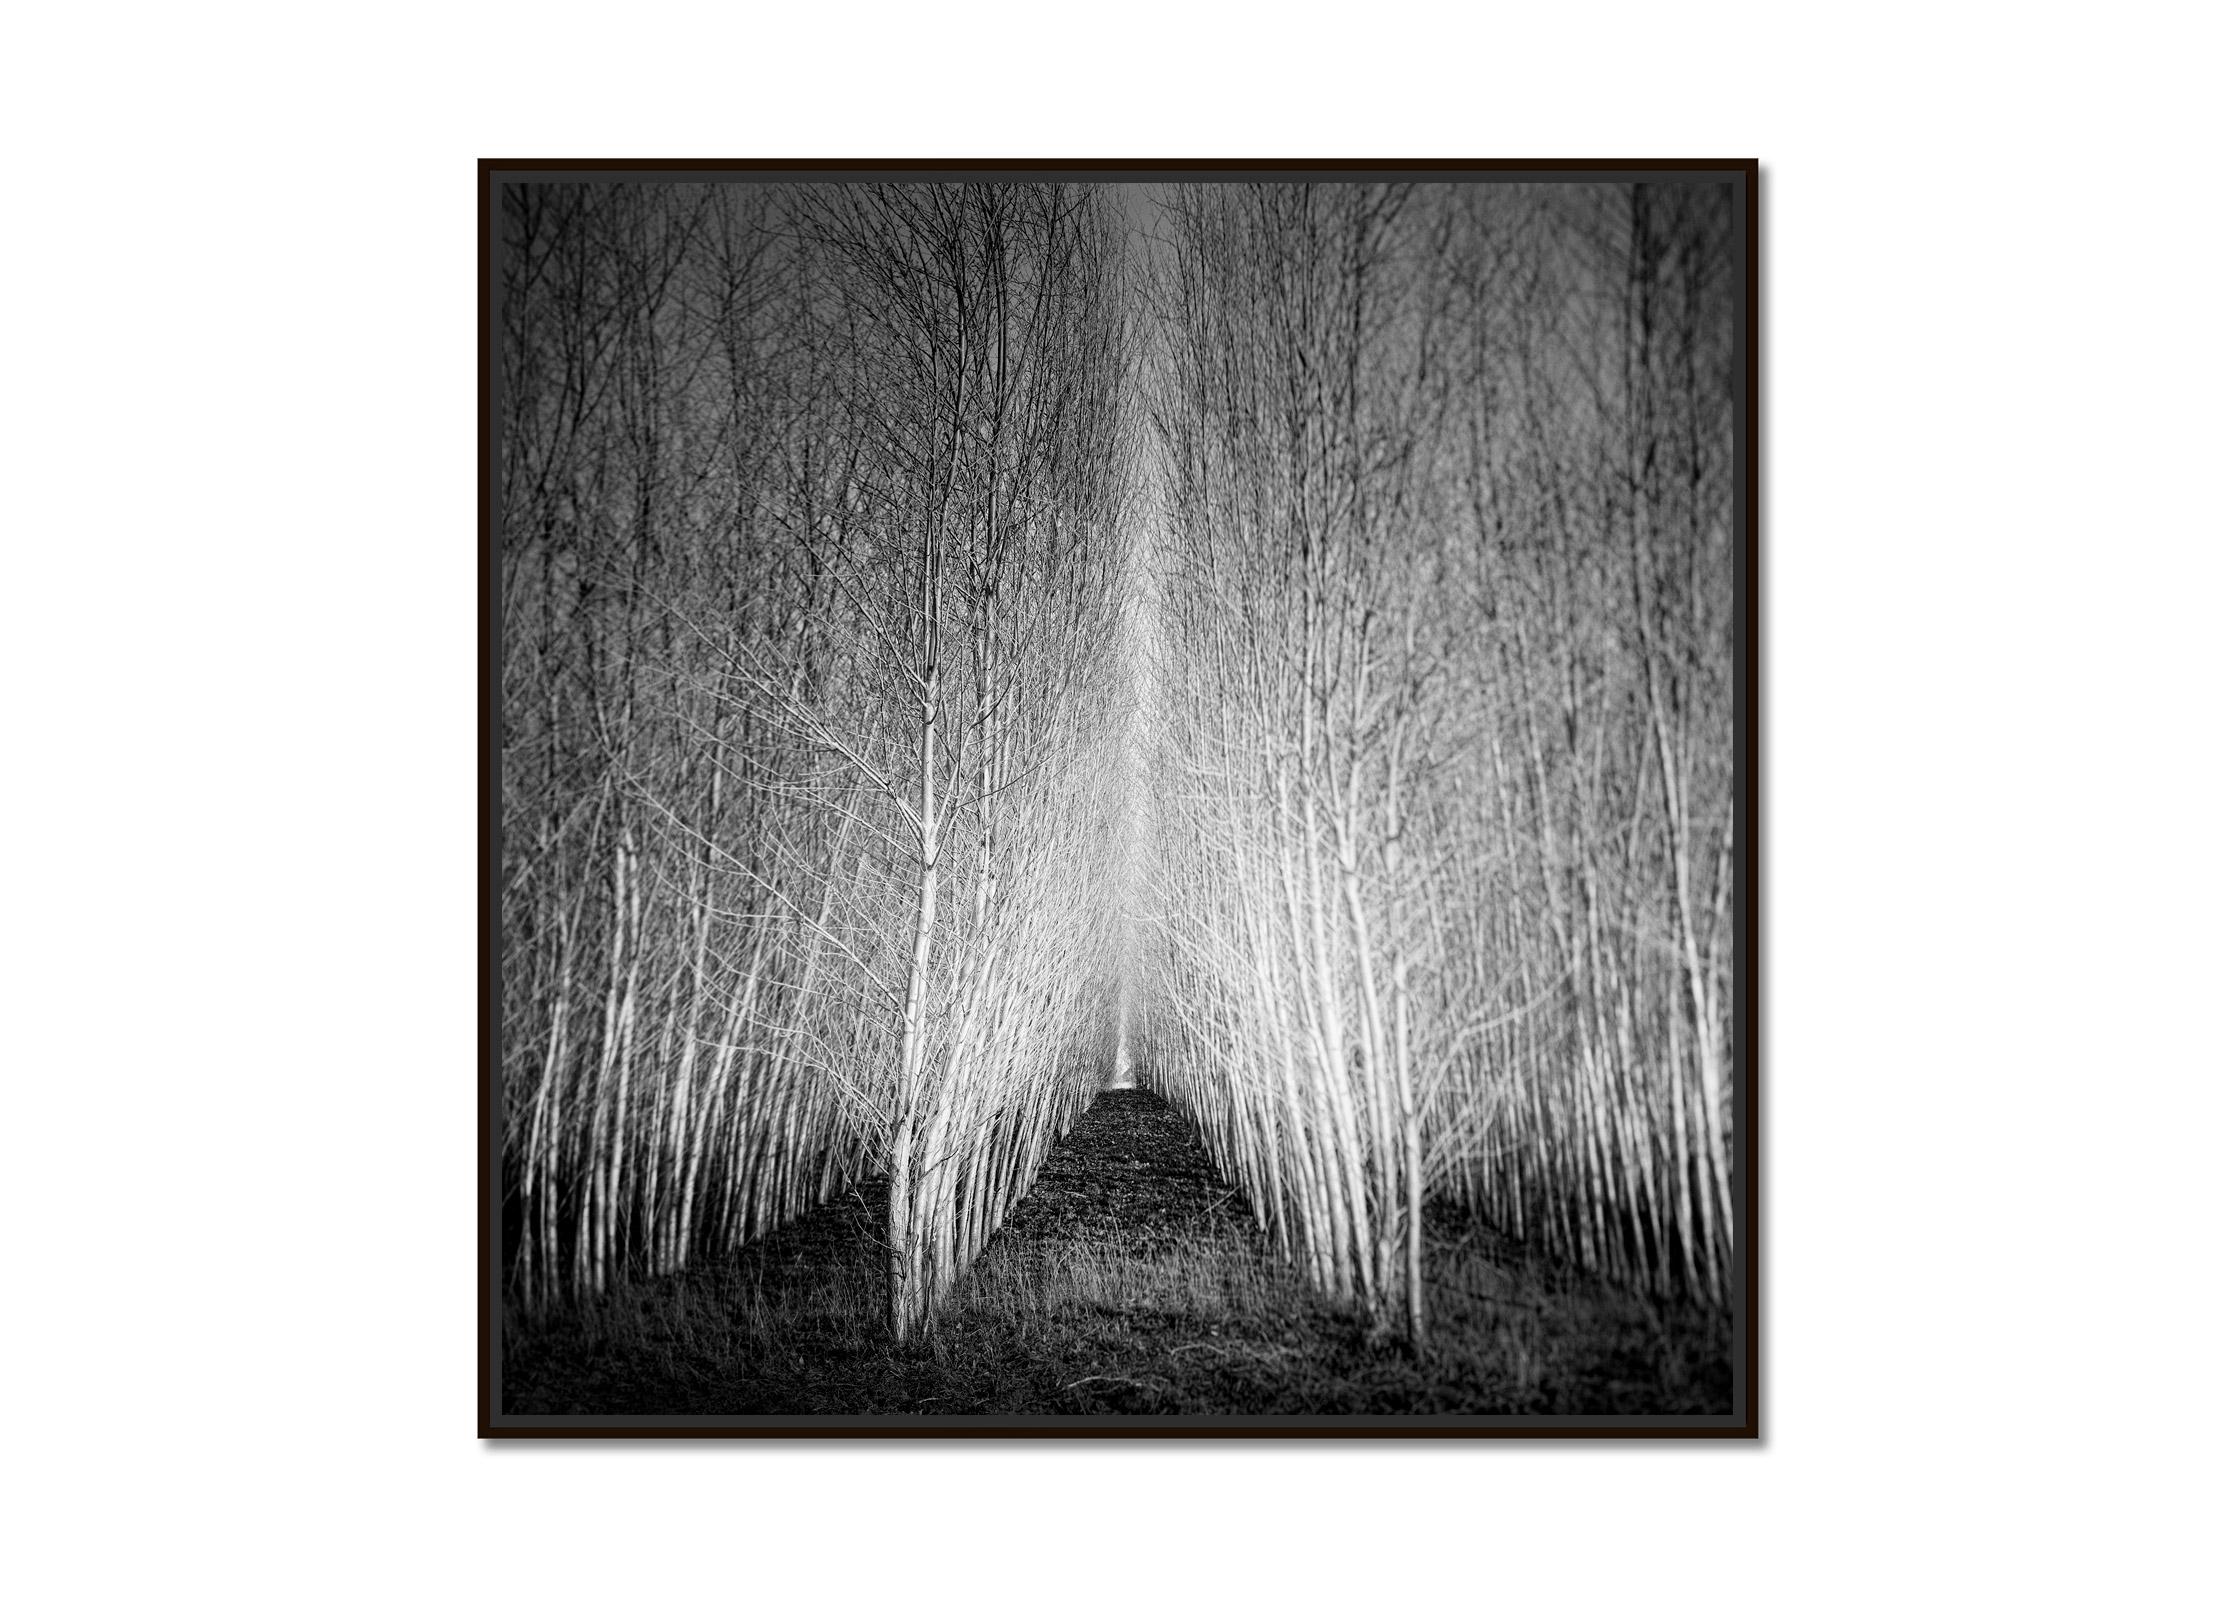 Populus Forest, tree avenue, Austria, black and white art landscape photography - Photograph by Gerald Berghammer